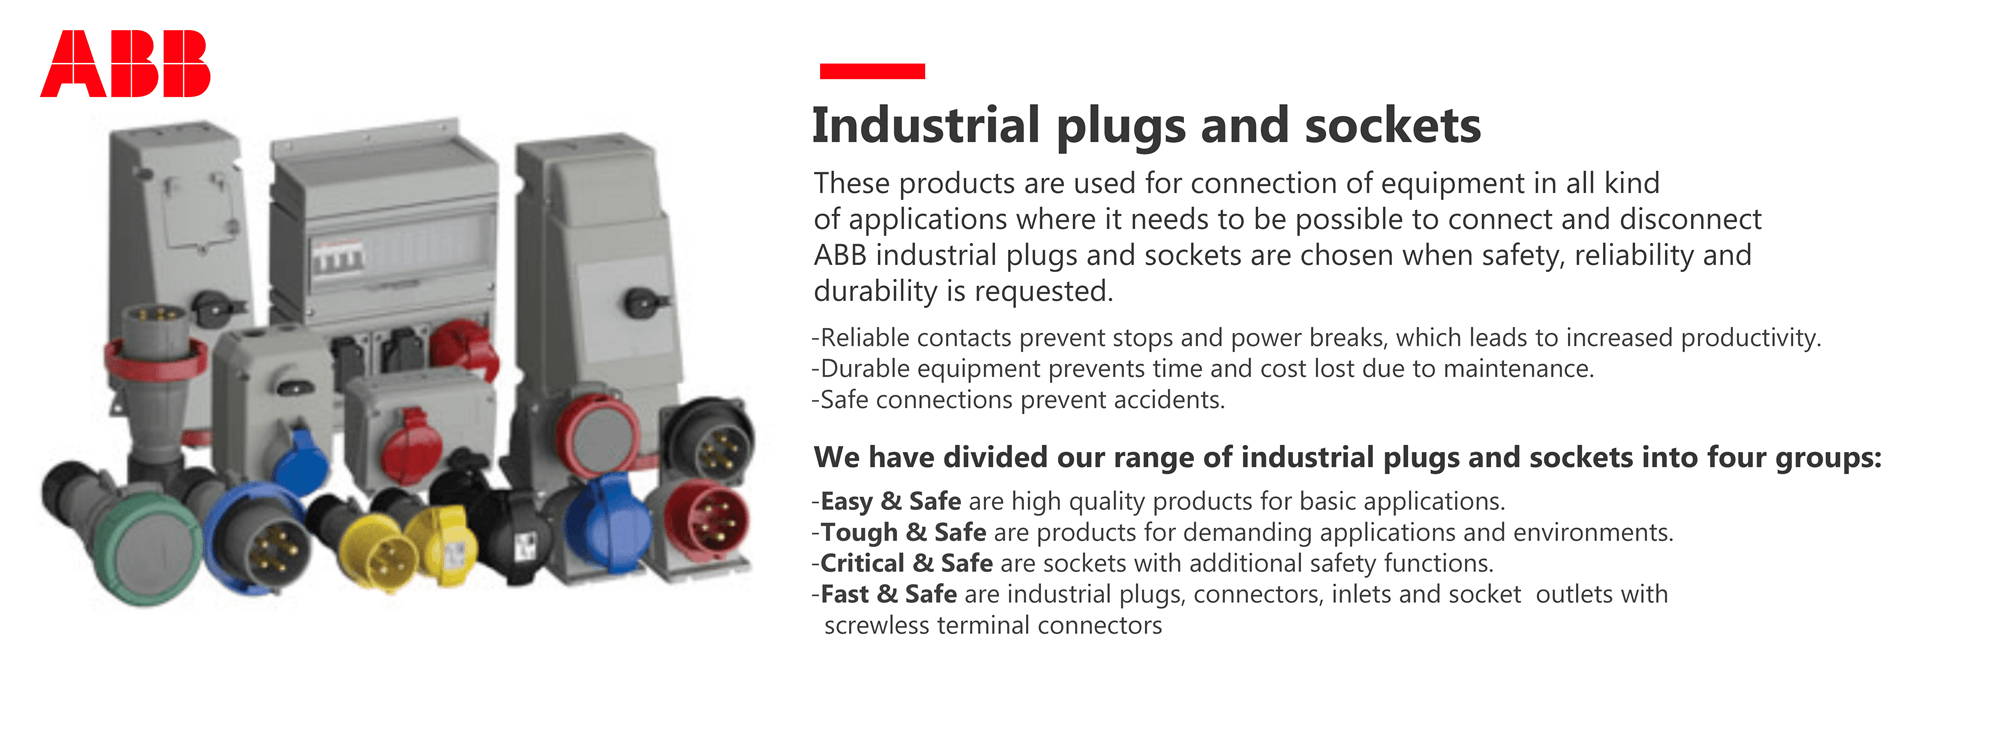 Industrial-plugs-and-sockets